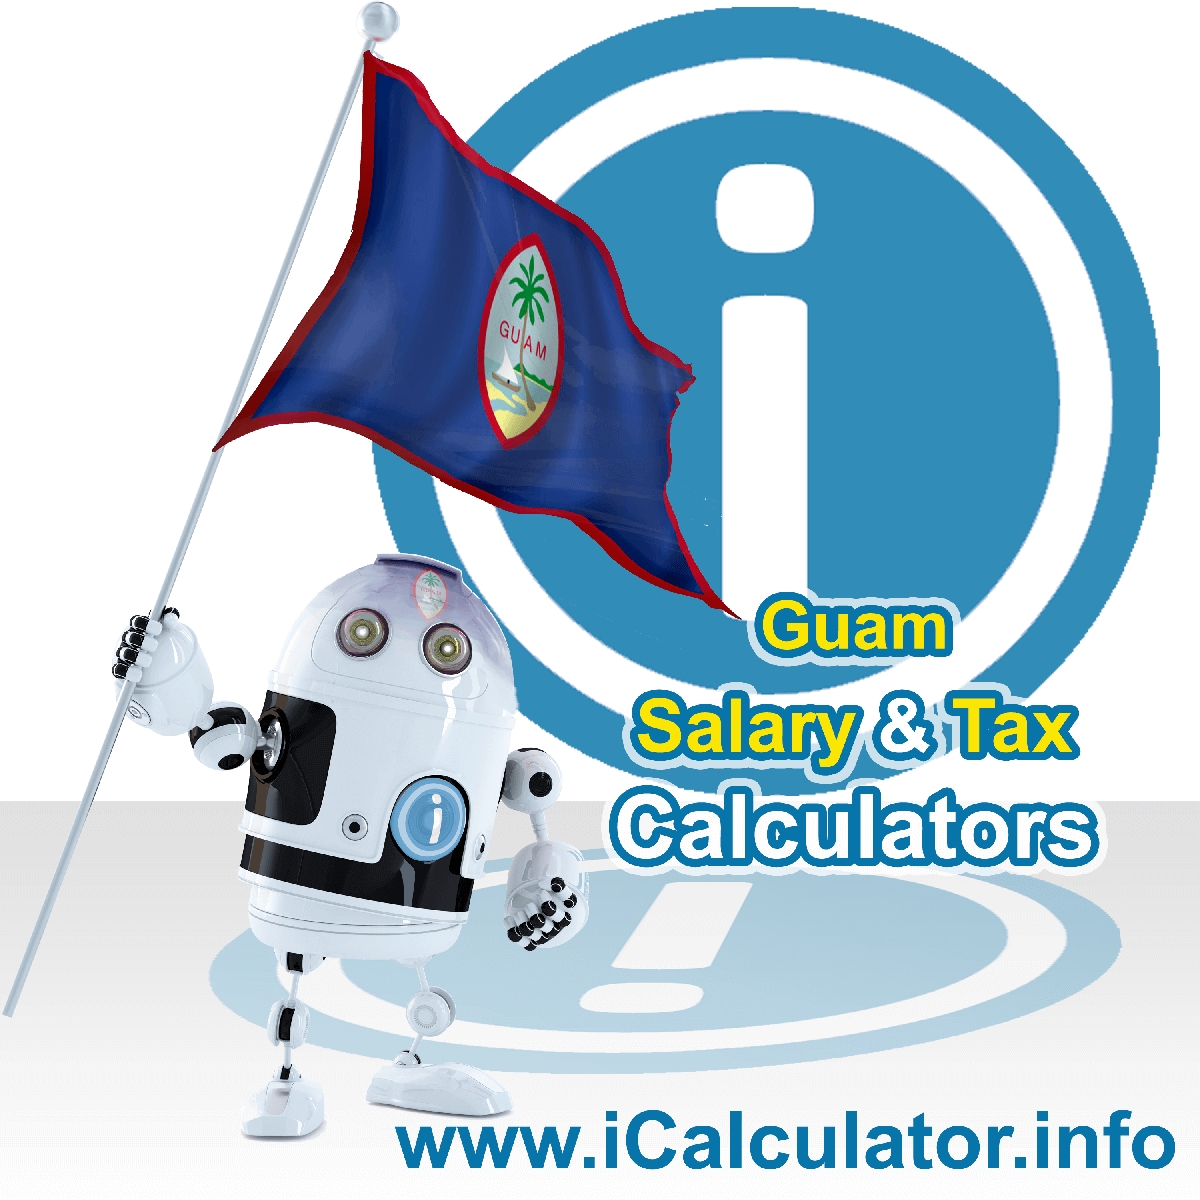 Guam Salary Calculator. This image shows the Guamese flag and information relating to the tax formula for the Guam Tax Calculator